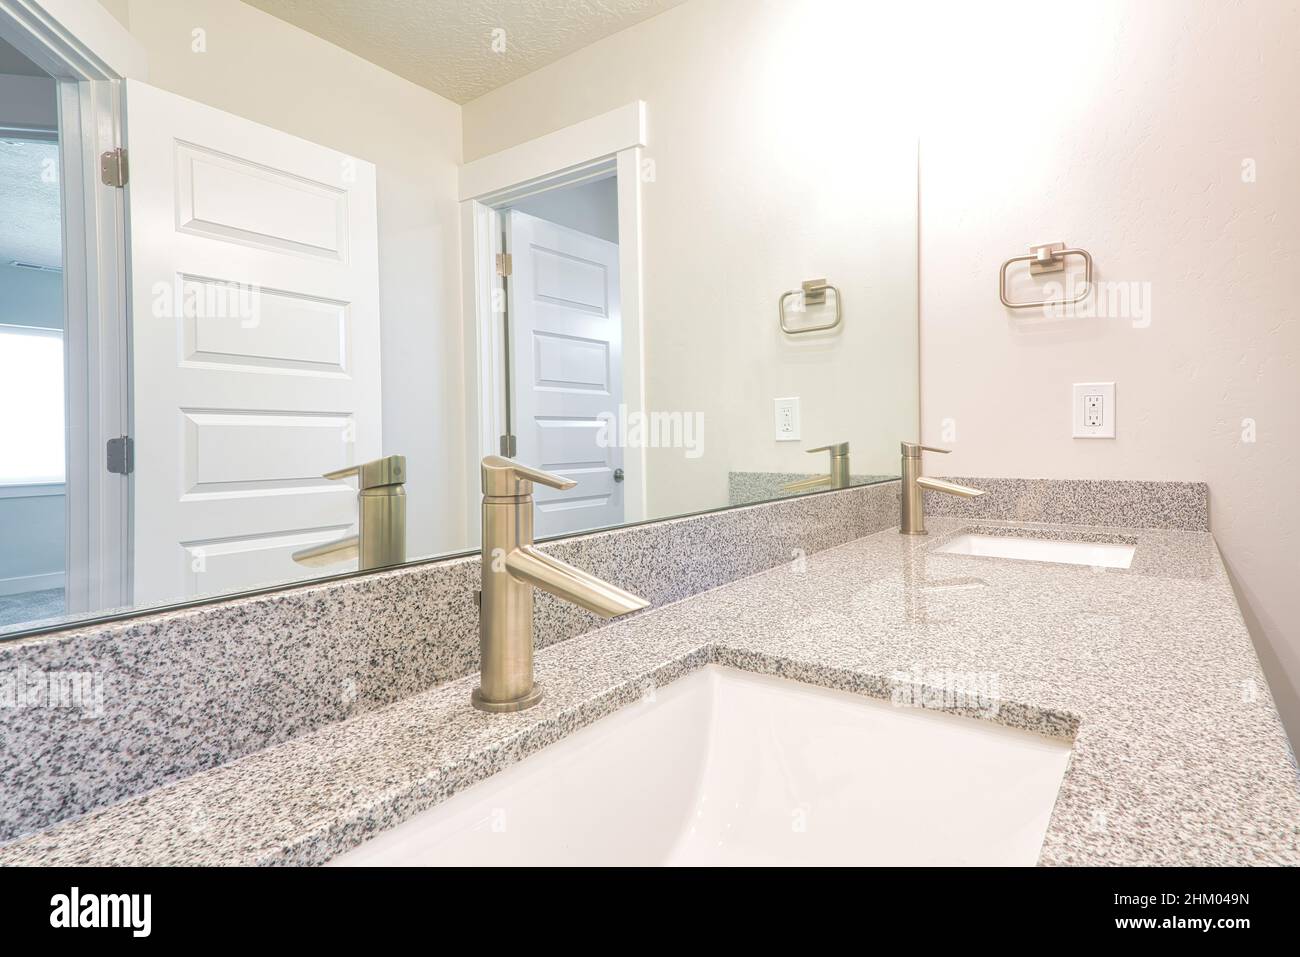 Double sink with rectagular undermount bowl and large mirror of bathroom. Close up of the gray countertop with built in clean basin and stainless stee Stock Photo